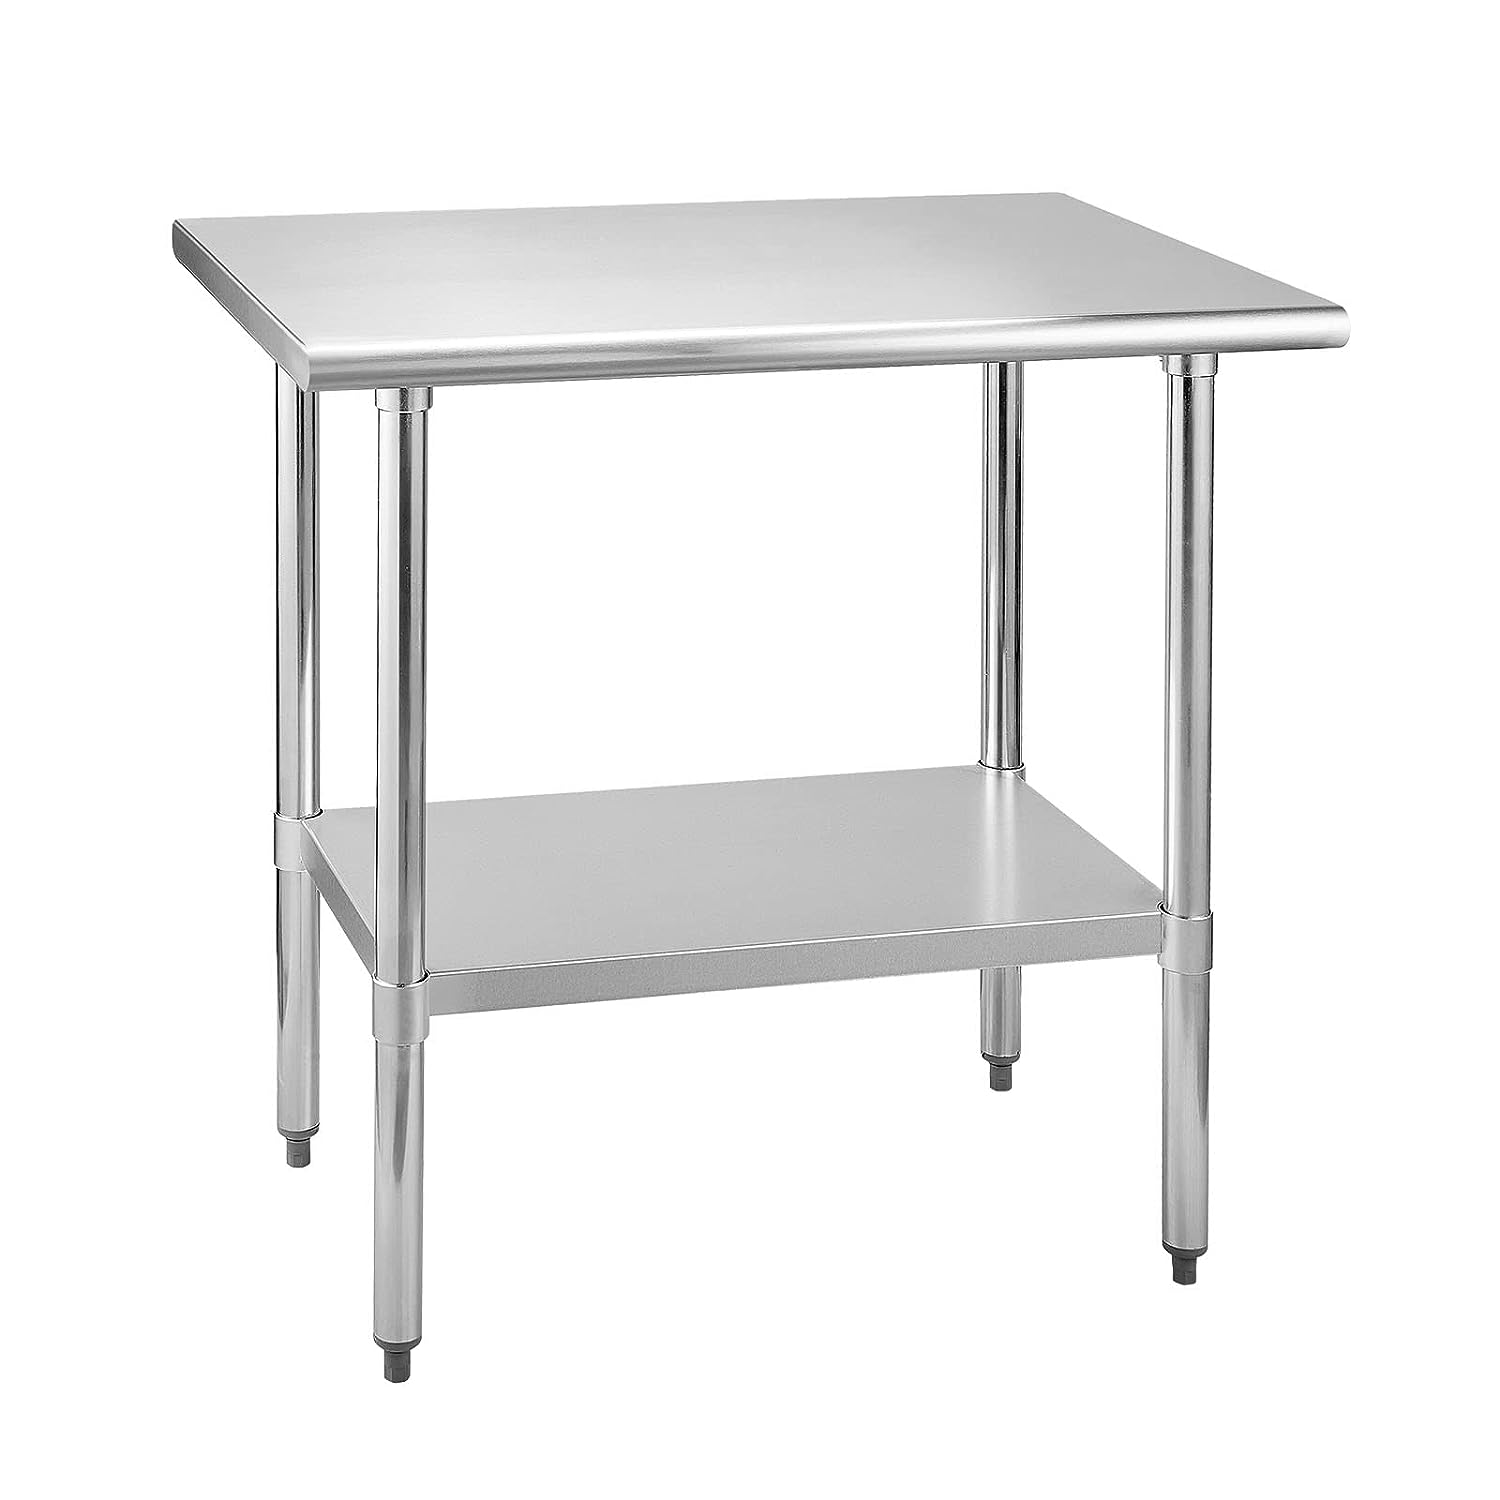 HOCCOT Stainless Steel Table for Prep & Work 24